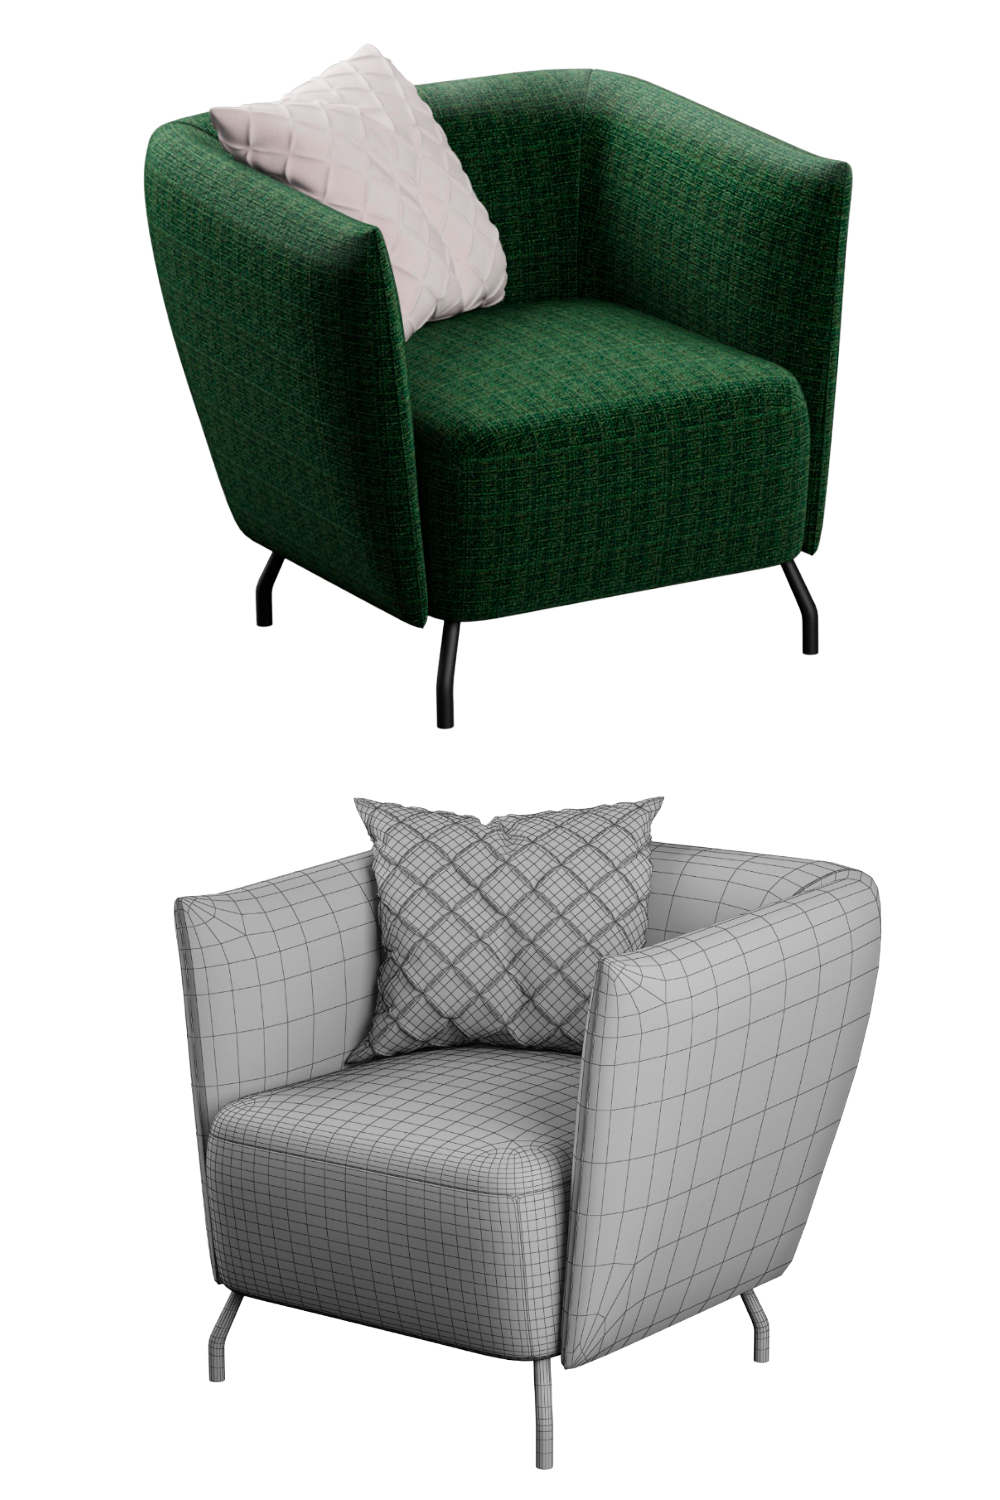 Rendering of a wonderful 3d model of a green armchair